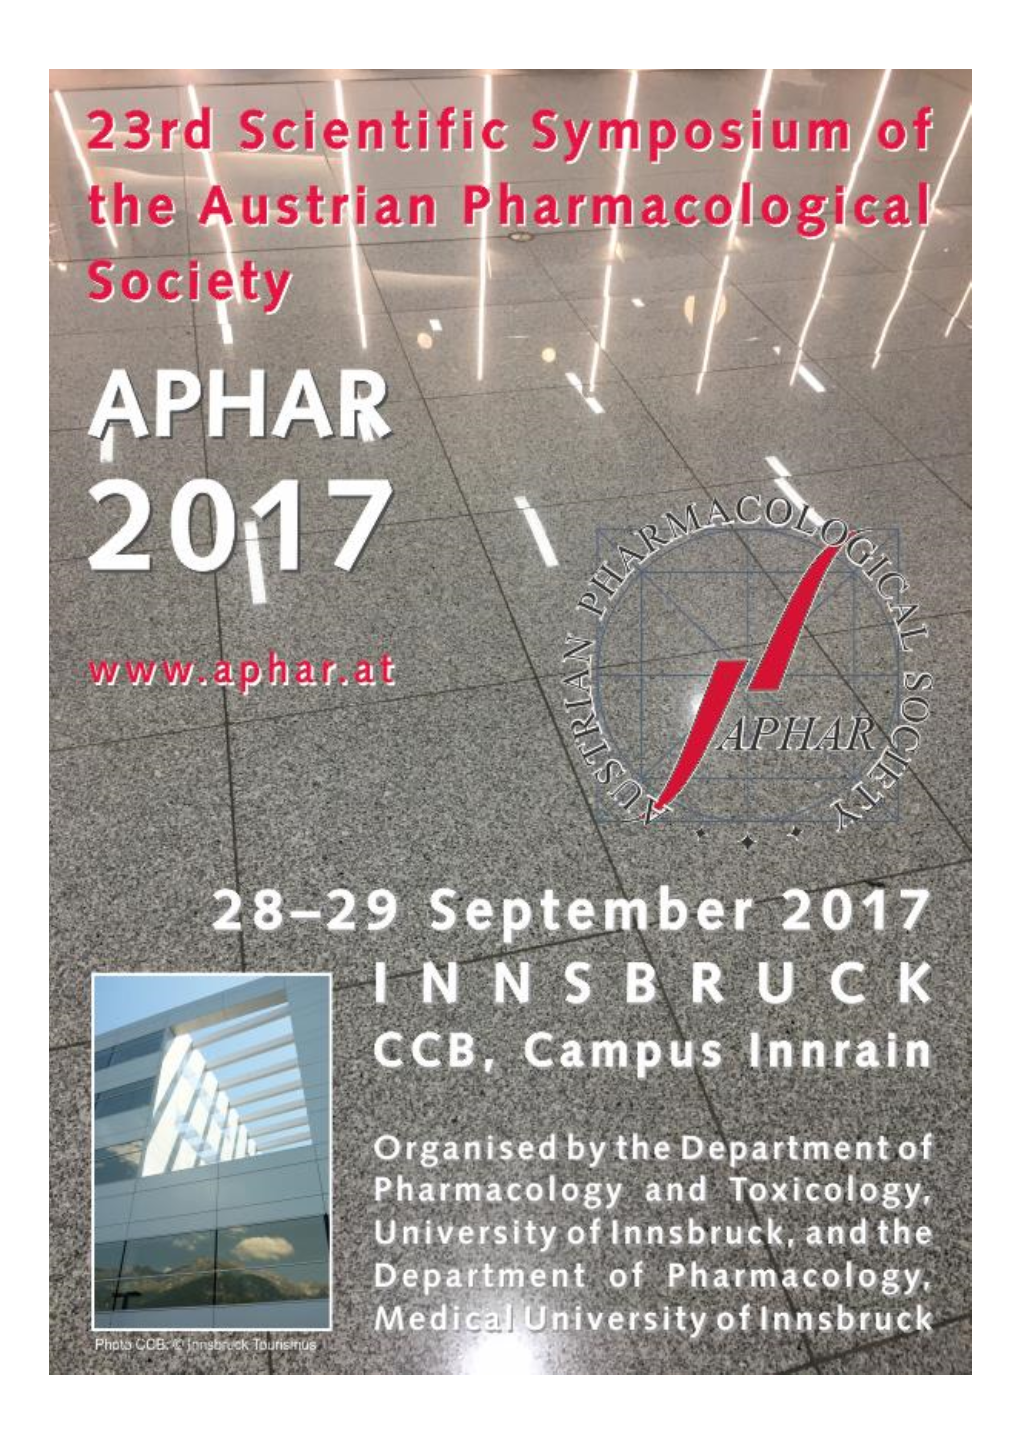 10Th Scientific Symposium of the Austrian Pharmacological Society